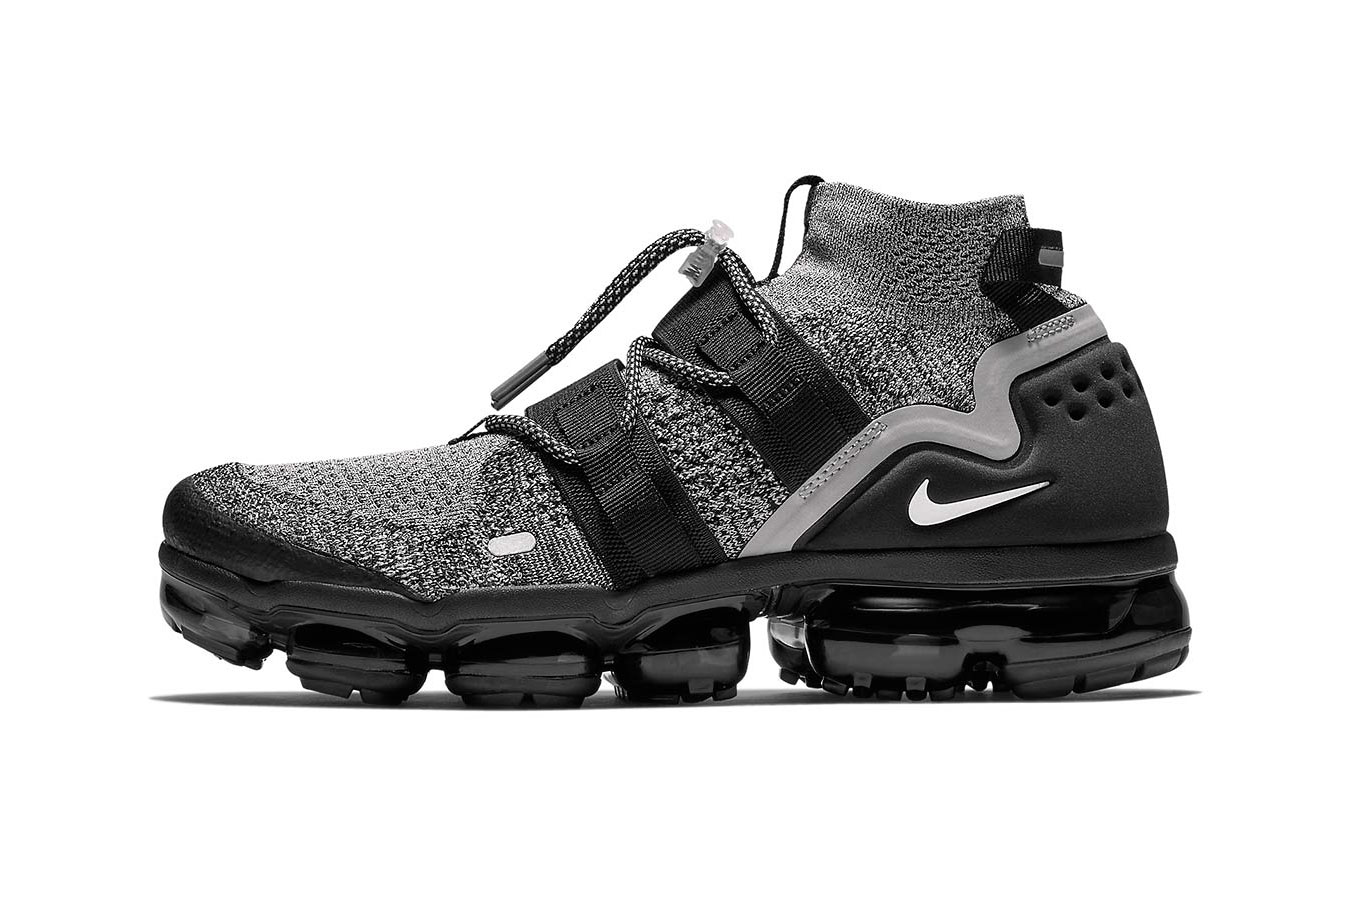 Nike air Vapormax Flyknit Utility "Moon Particle" Release Date oreo colorway sneaker price info purchase buy online size